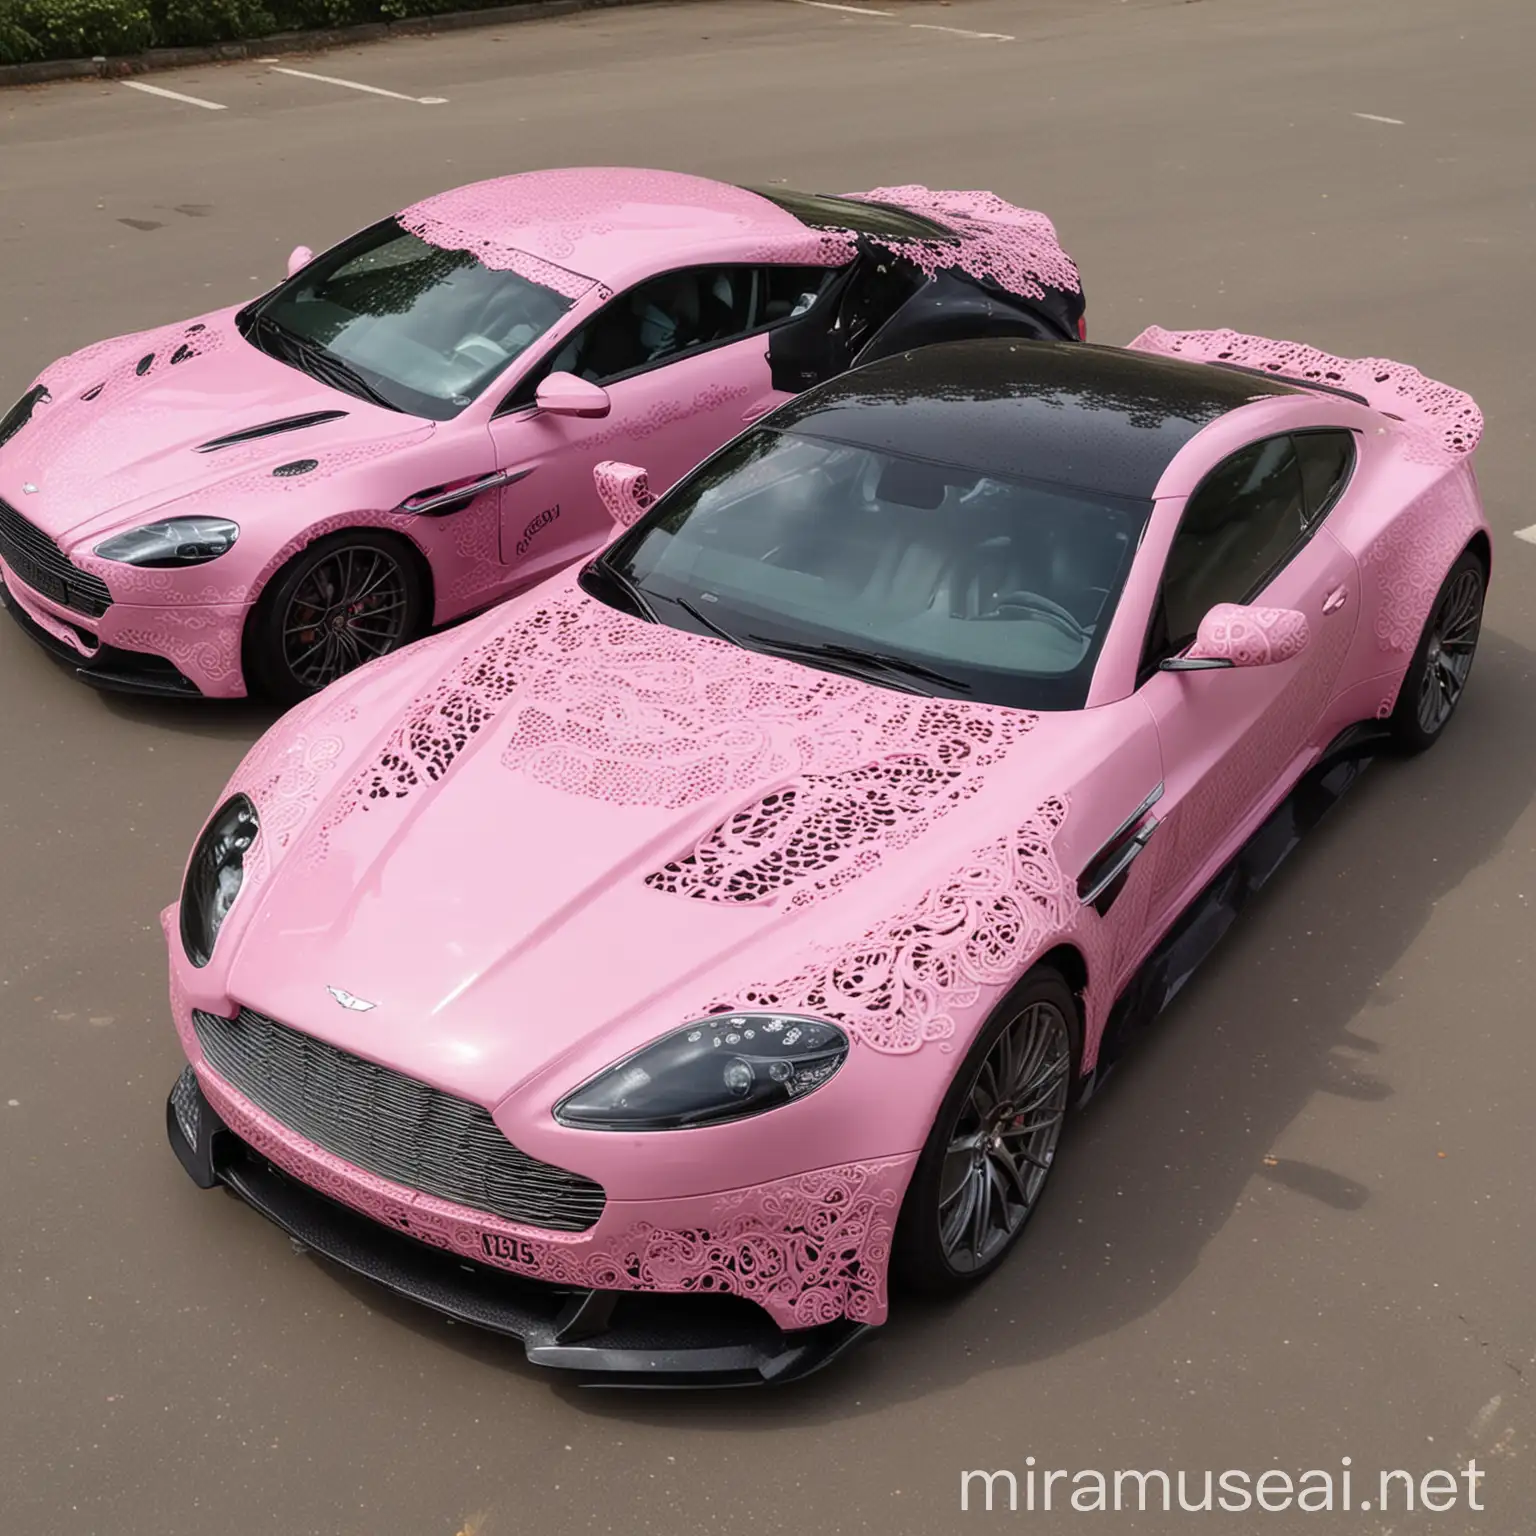 Customized Pink Aston Martin with Genius Written on Side and Lace Decals